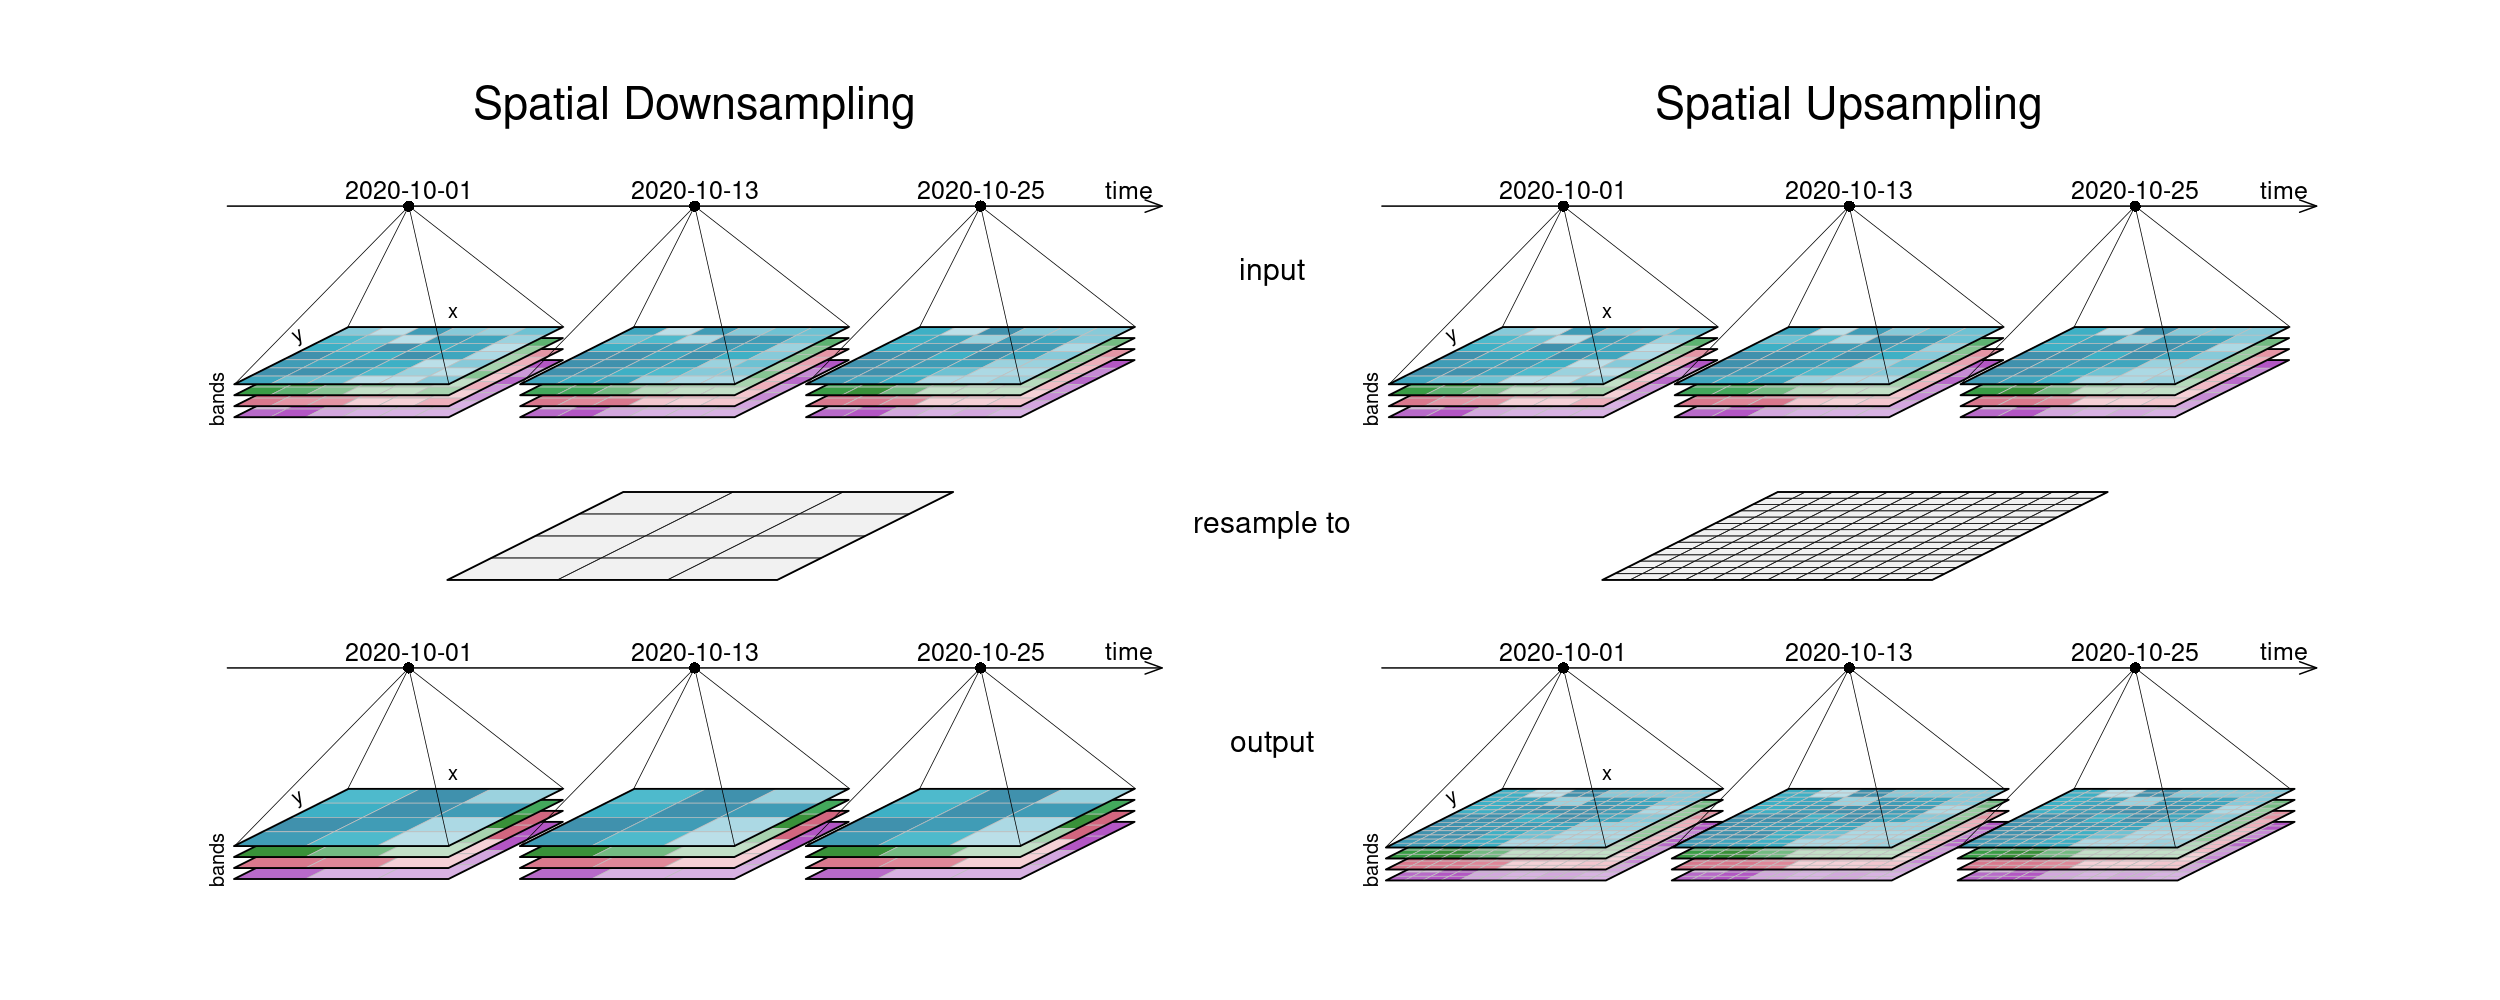 Datacube spatial resampling (up and down): Downsampling: The resulting tiles have a lower spatial resolution than the input tiles. Upsampling: The resulting tiles have a higher spatial resolution than the input tiles, but contain the same image than before (no information added).